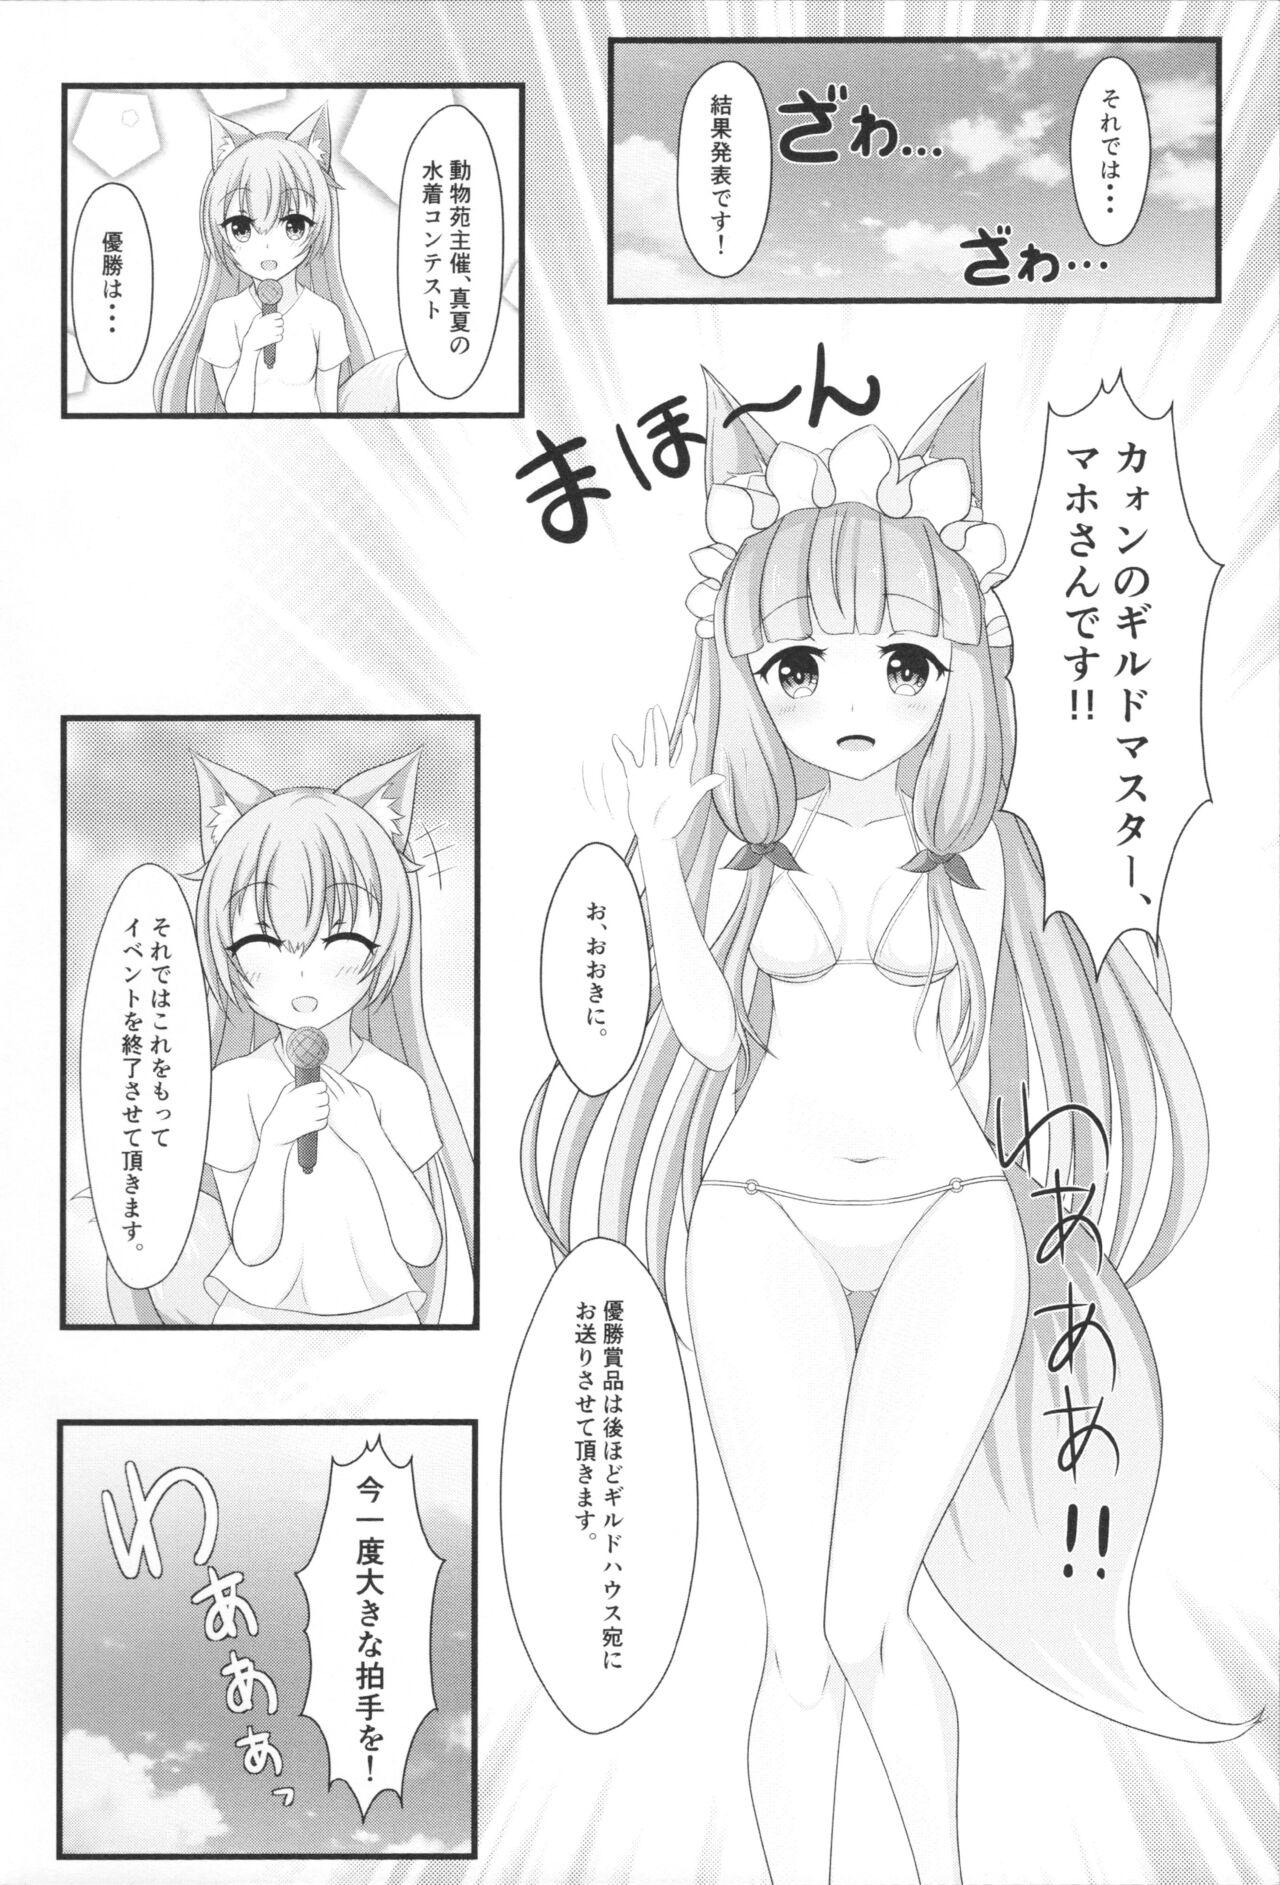 Couples Maho Hime Connect! 2 - Princess connect  - Page 6